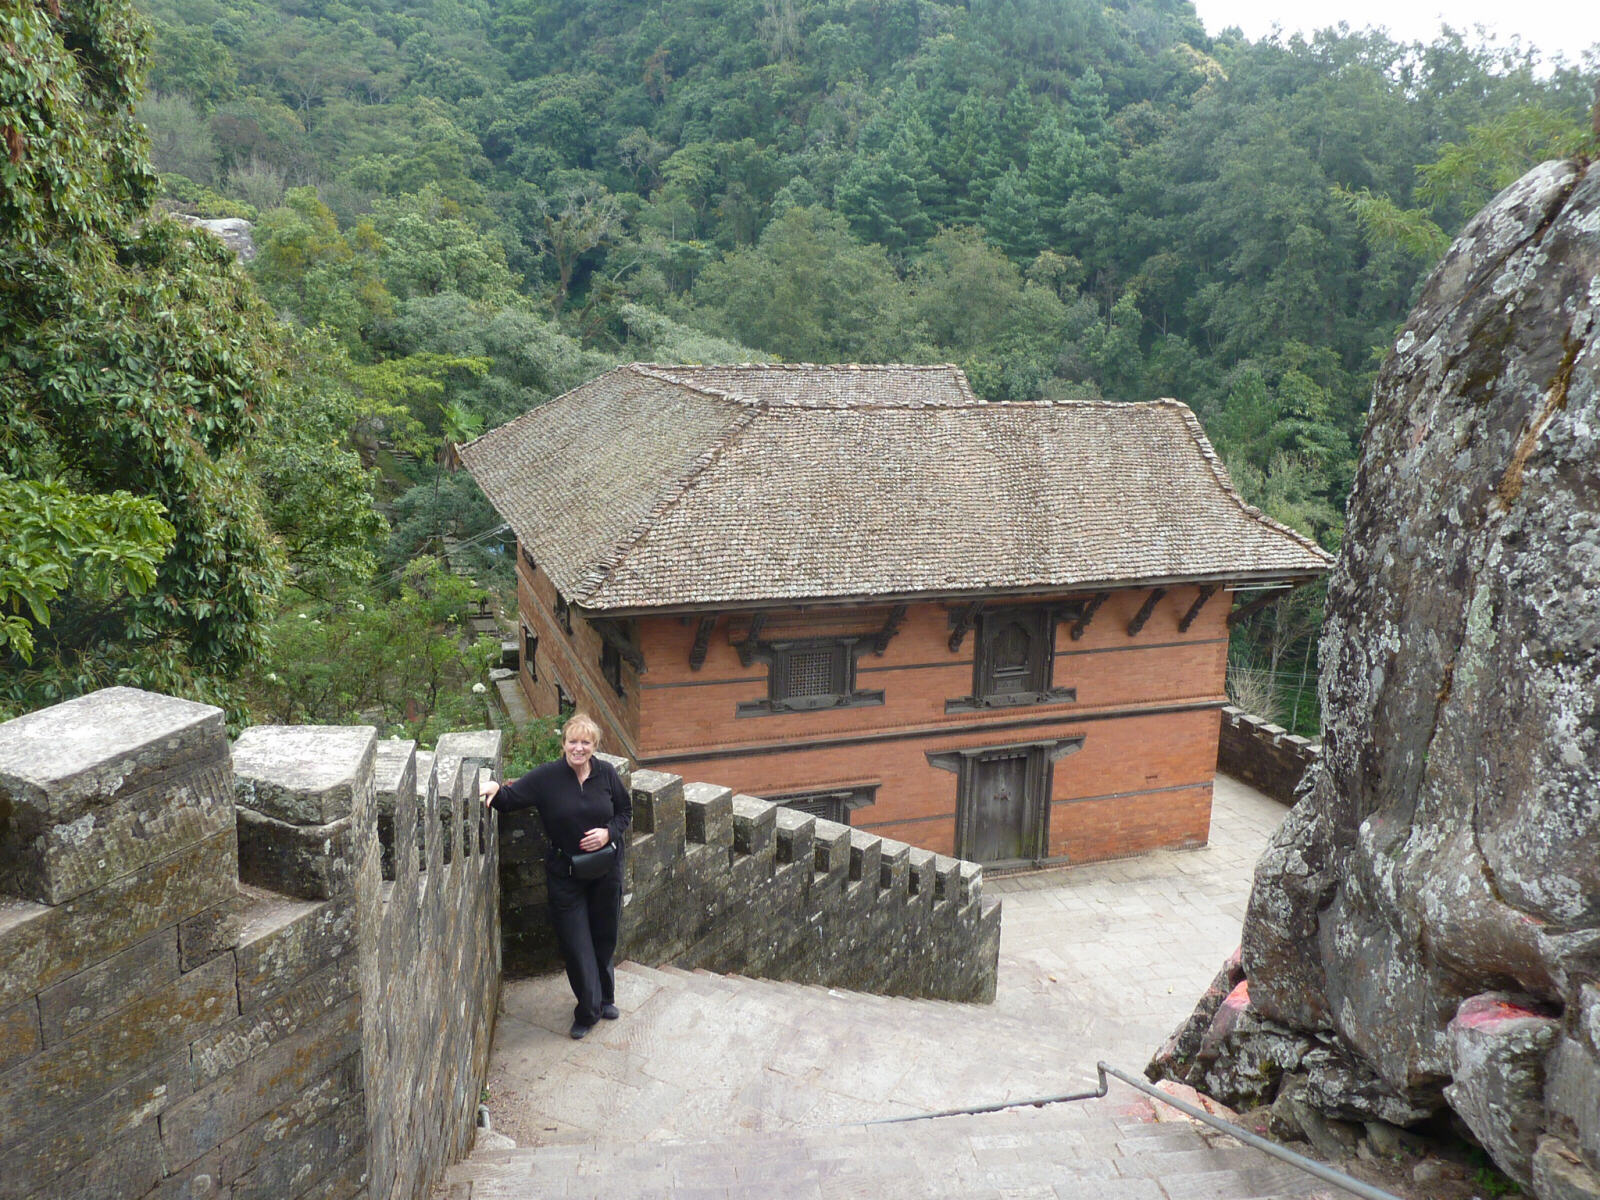 The Durbar fort and palace in Gorkha, Nepal